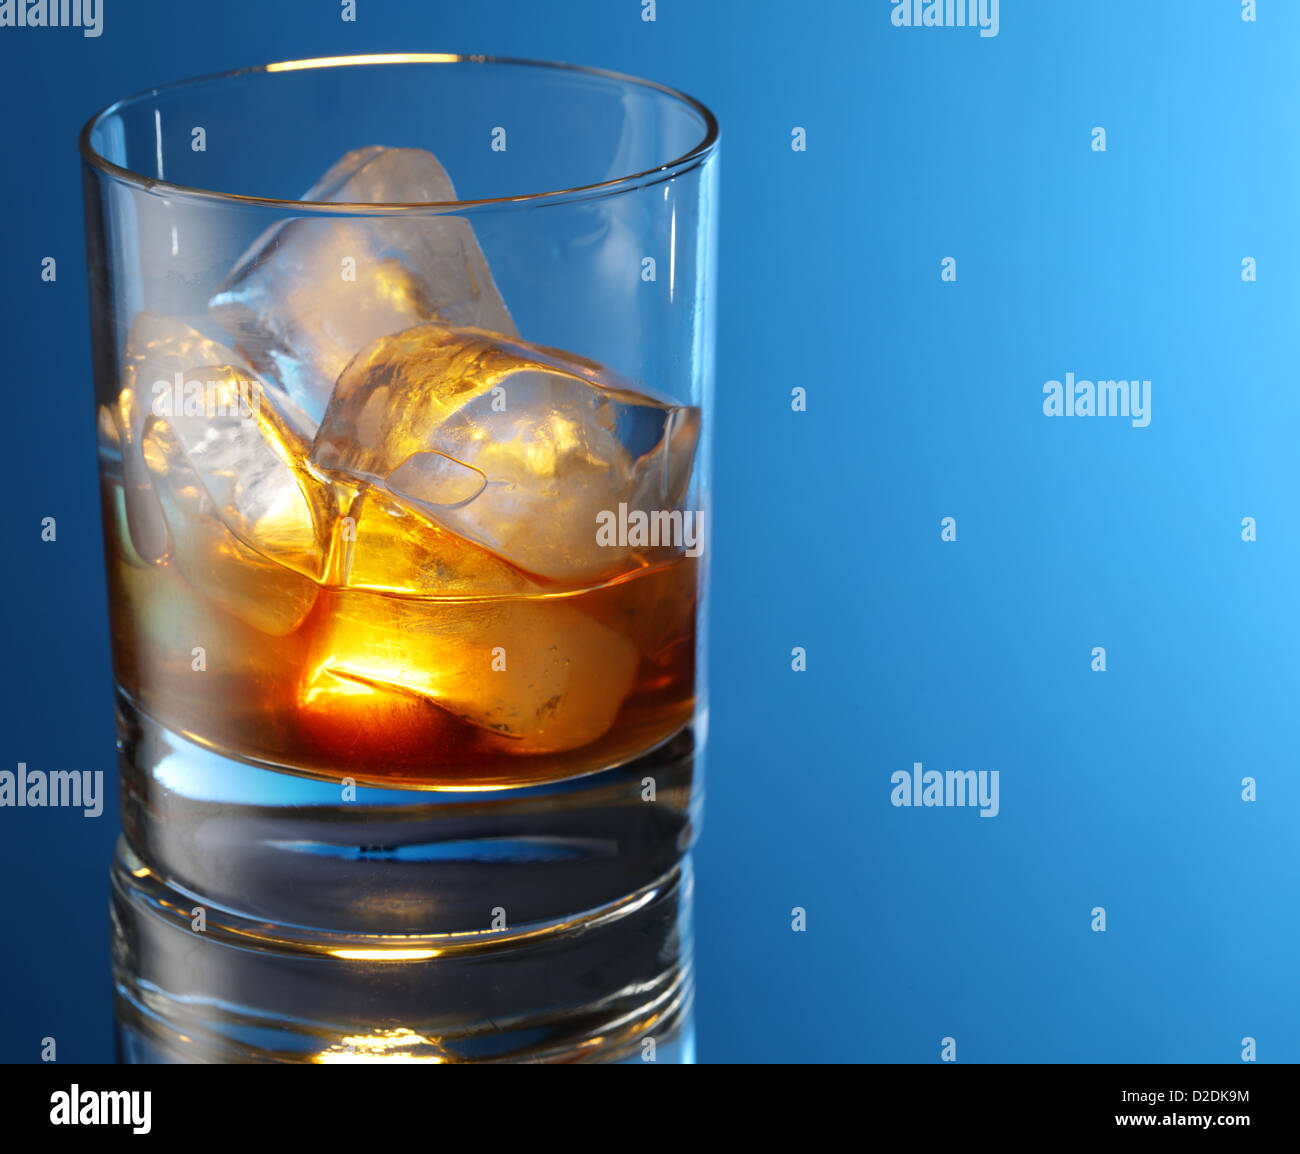 Whiskey glass on a blue background. Stock Photo